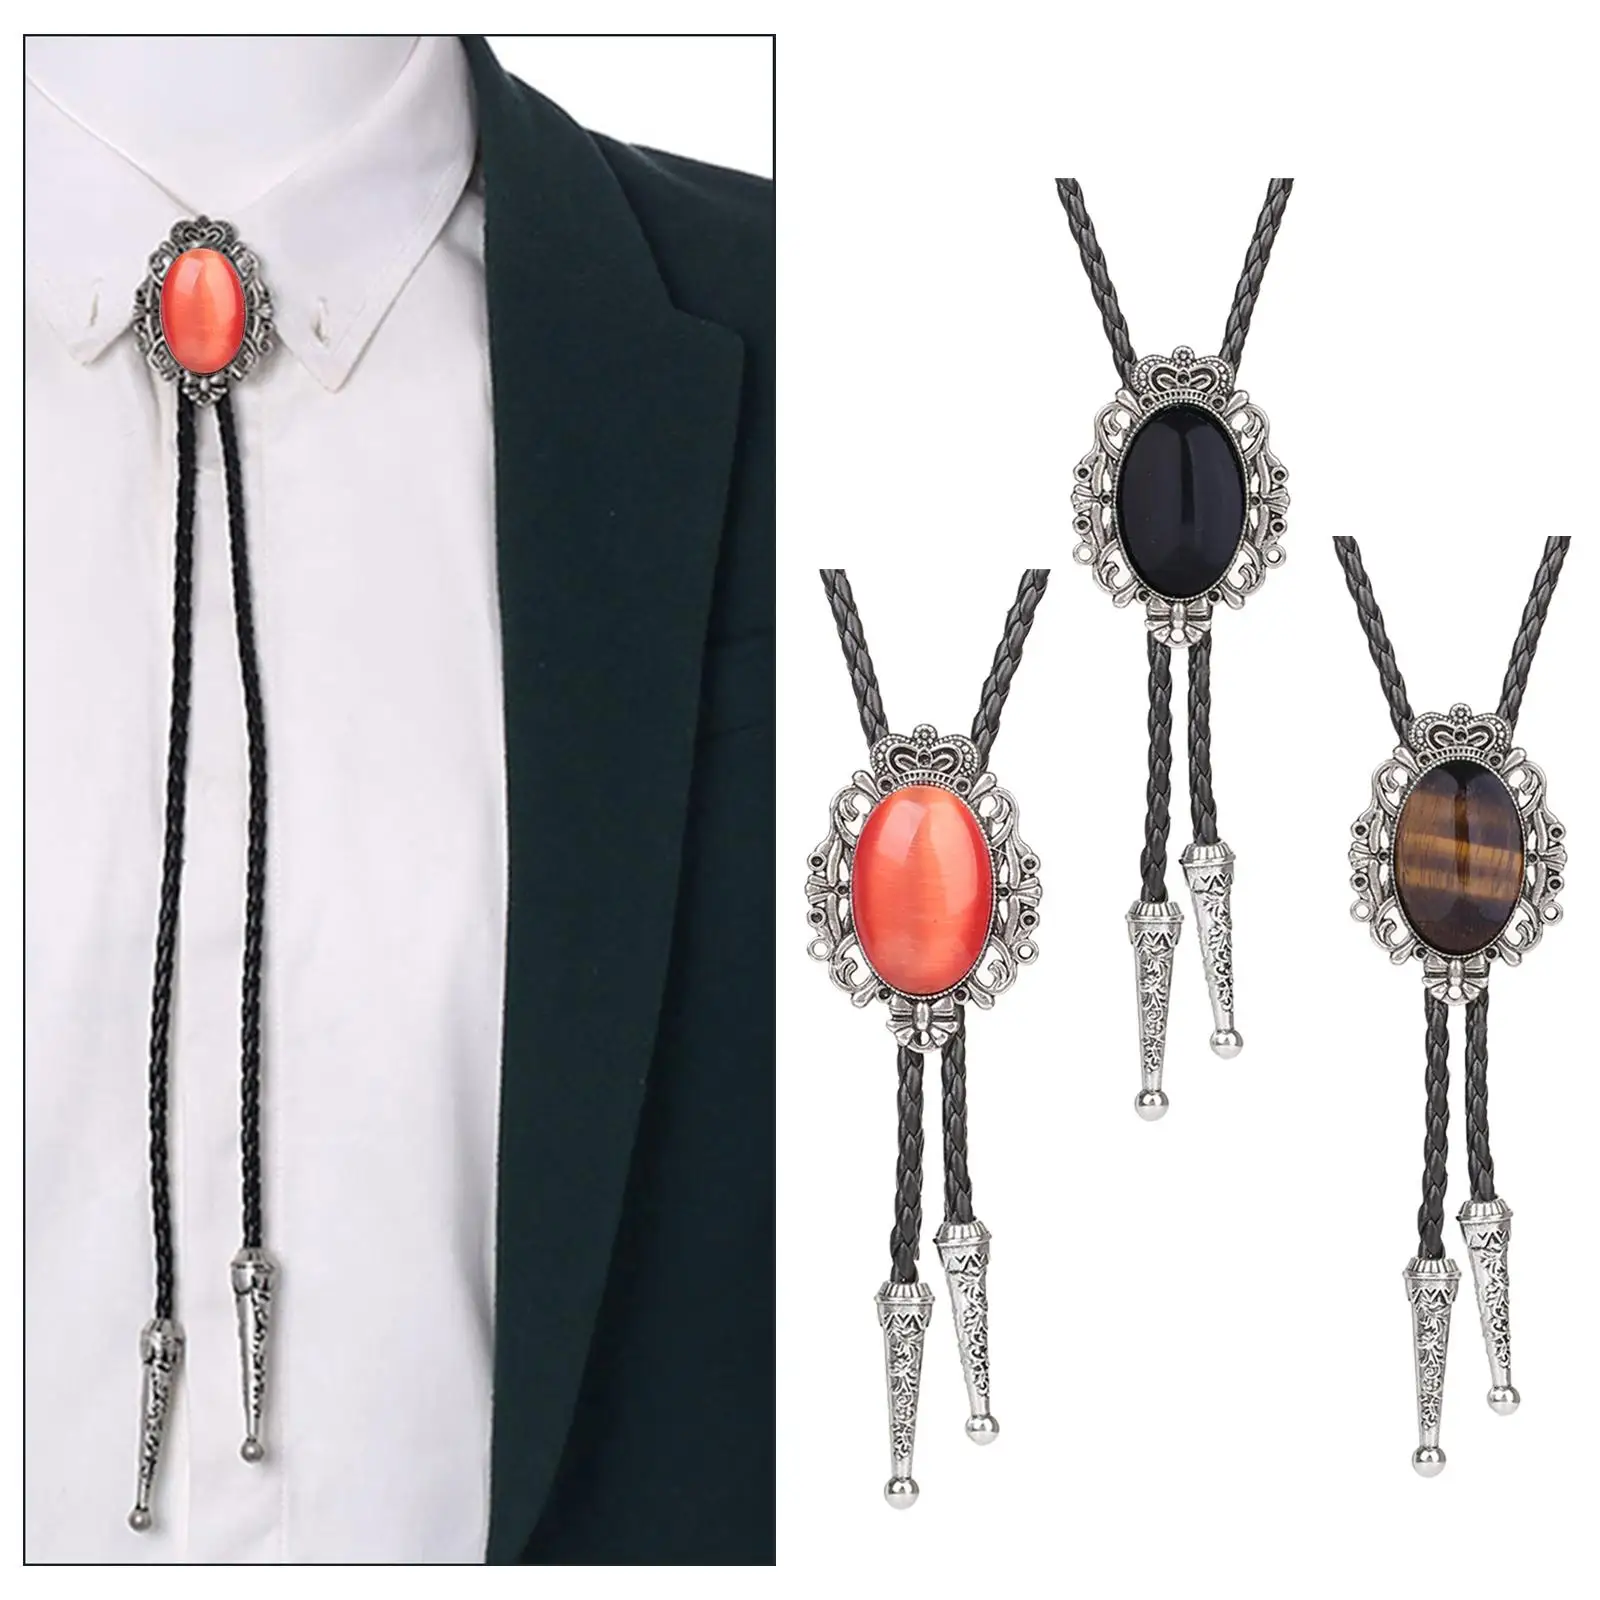 Crown Bolo Tie Necktie Western Cowboy Vintage Adjustable Leather Accessories Costume Gift Oval Necklace for Party Men and Women